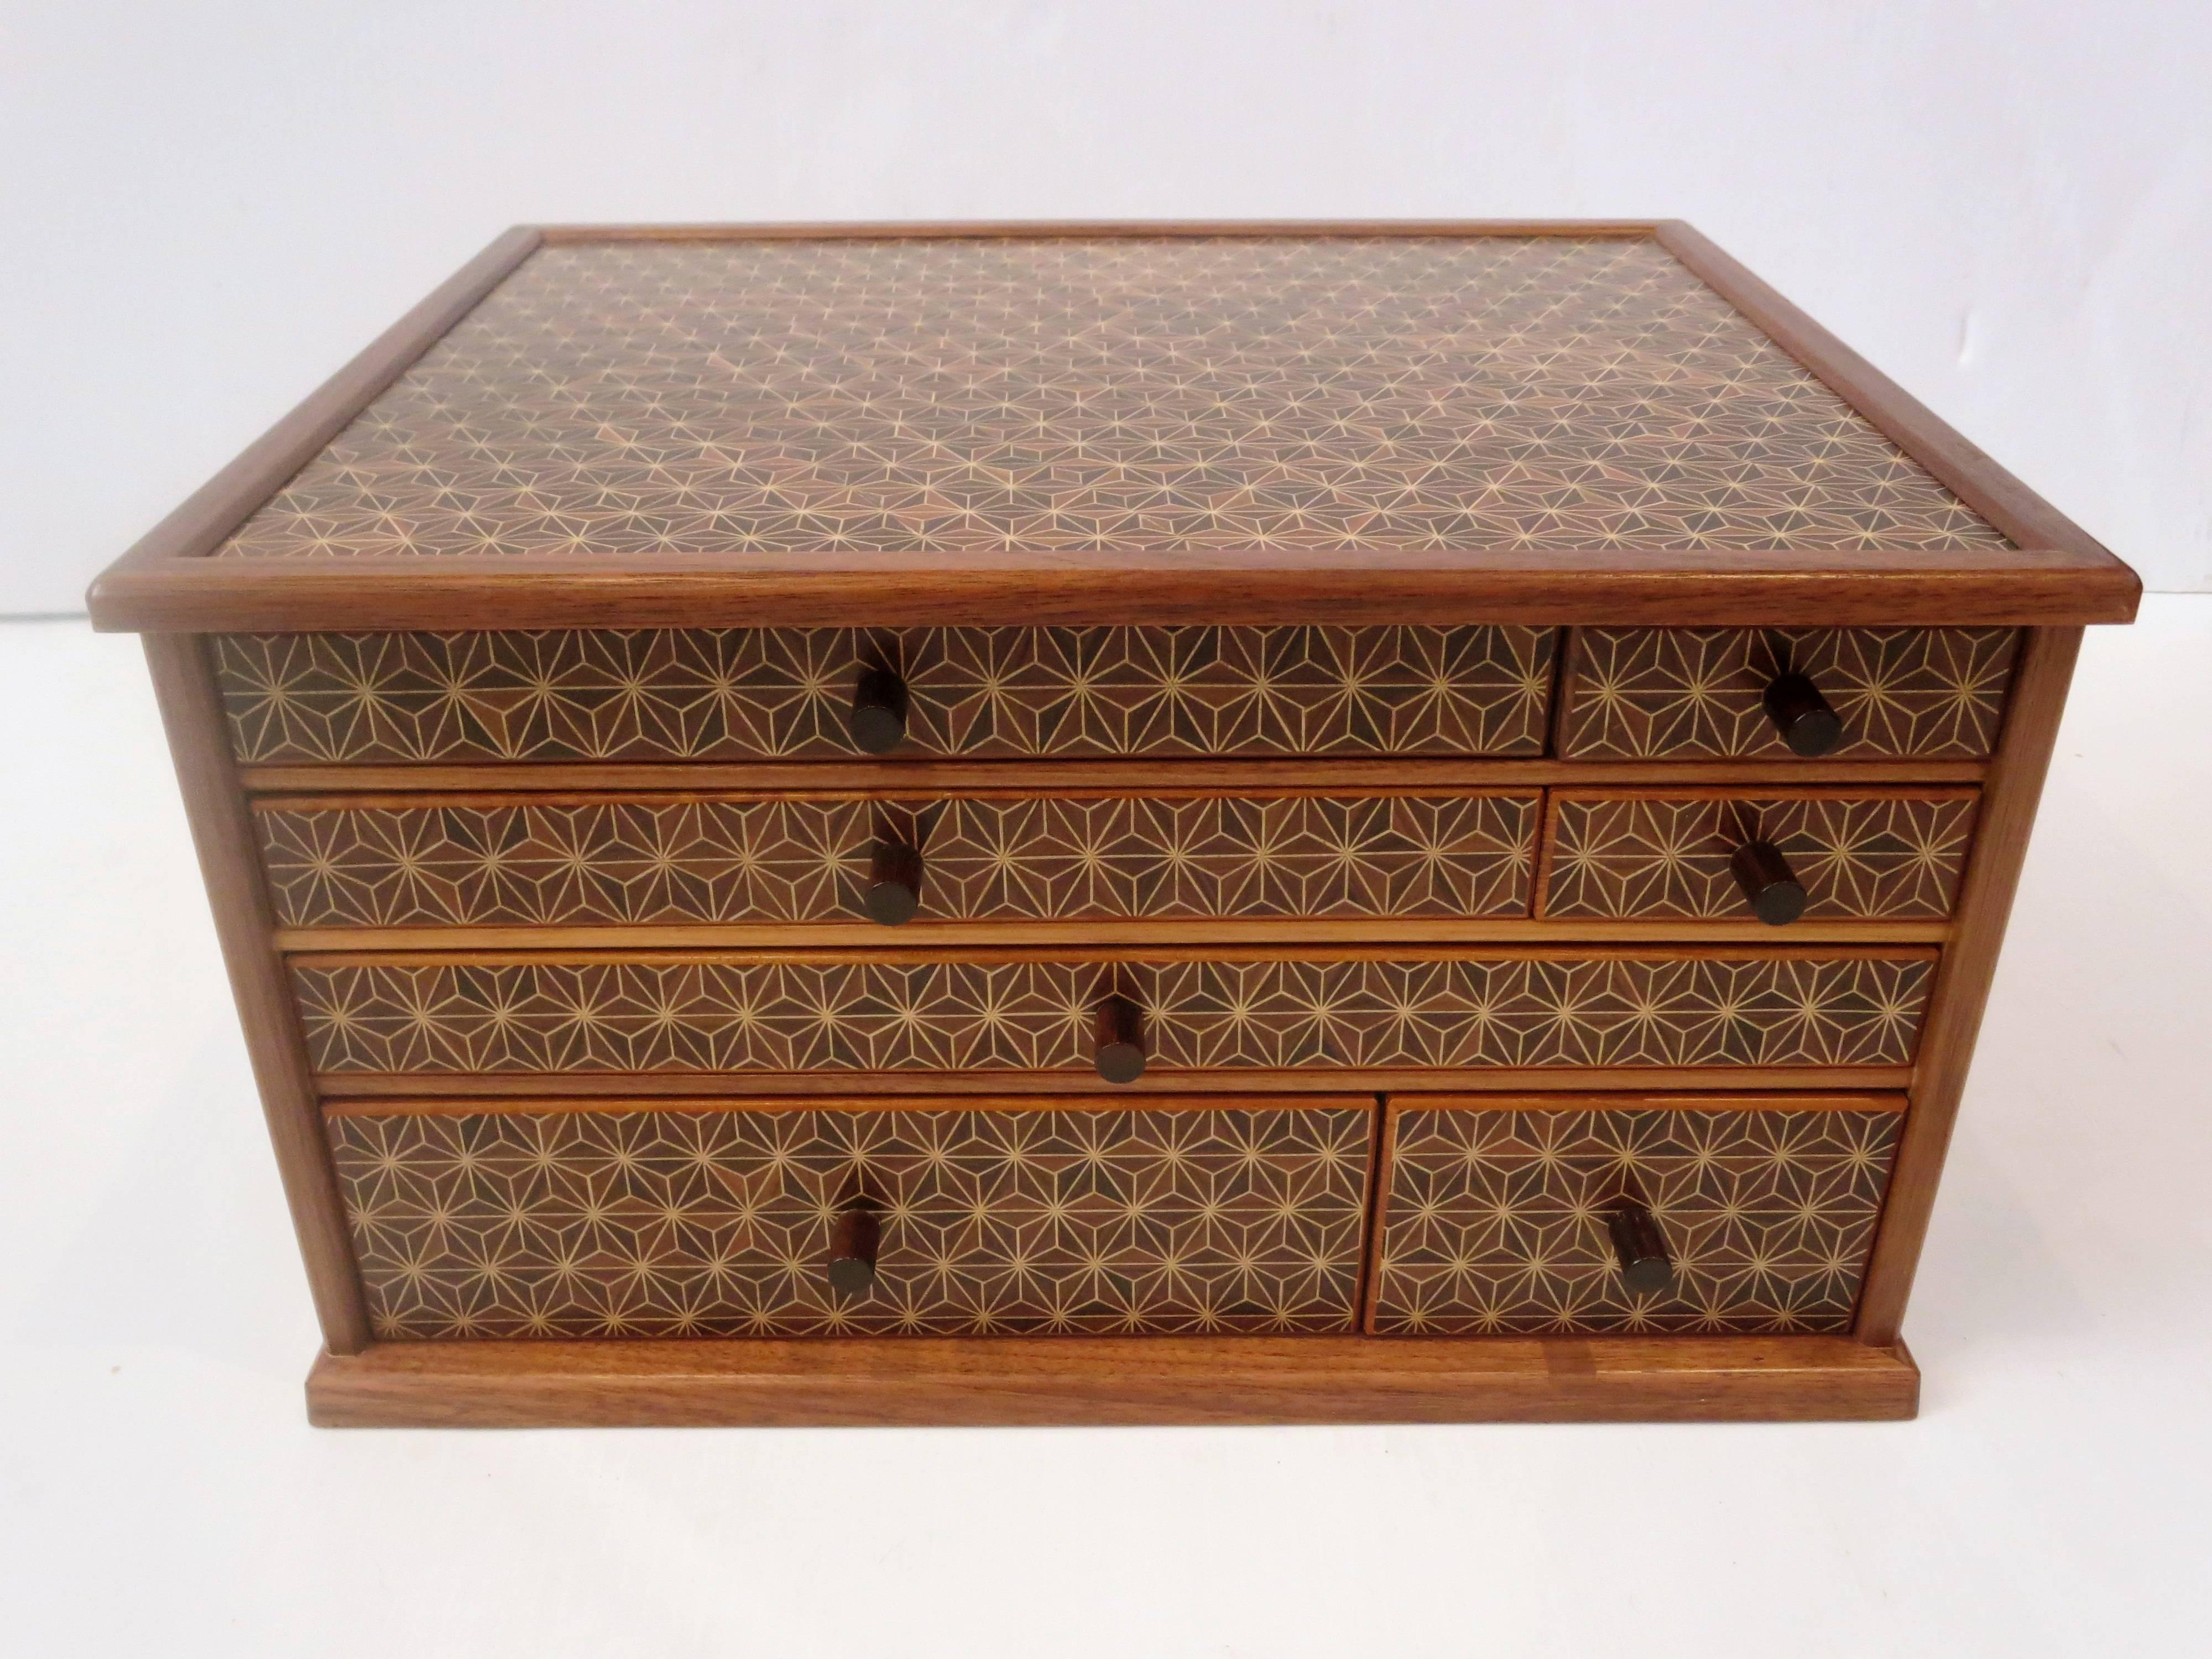 A very rare and unique Japanese jewelry box with multiple compartments. Beautiful geometric pattern with rosewood handles. Drawers can be rearranged for different configurations. All handmade, beautiful construction. Very nice condition on this